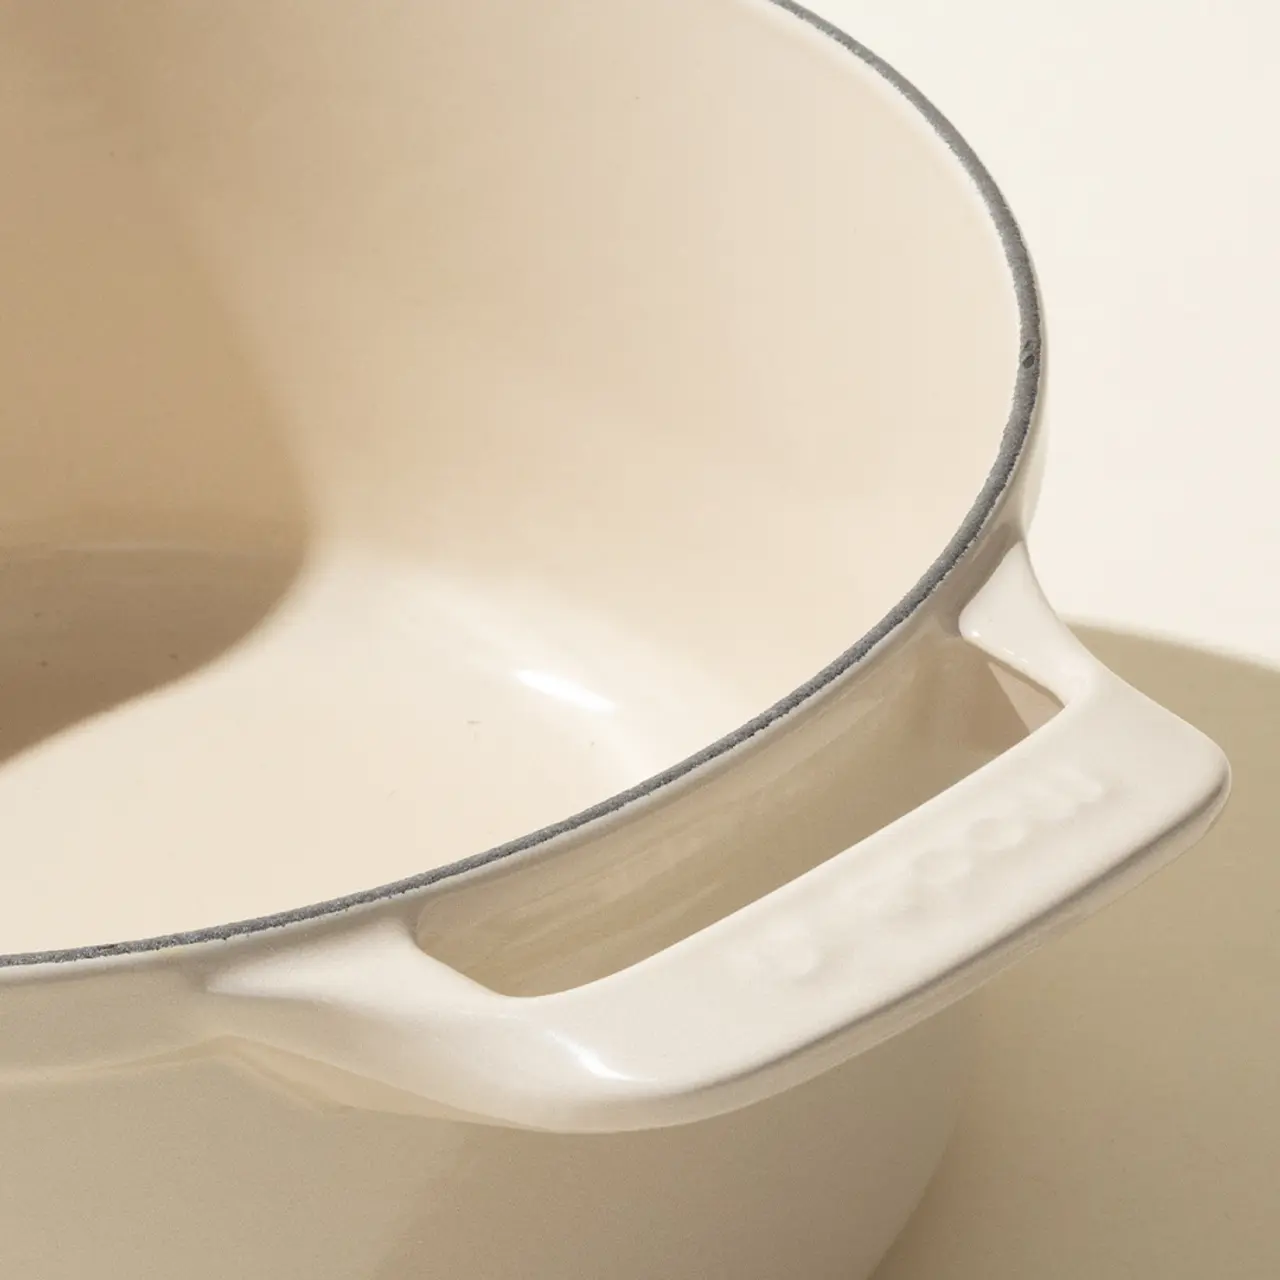 Close-up of a beige ceramic toilet with a grey toilet lid seal and a visible brand name on the ceramic.